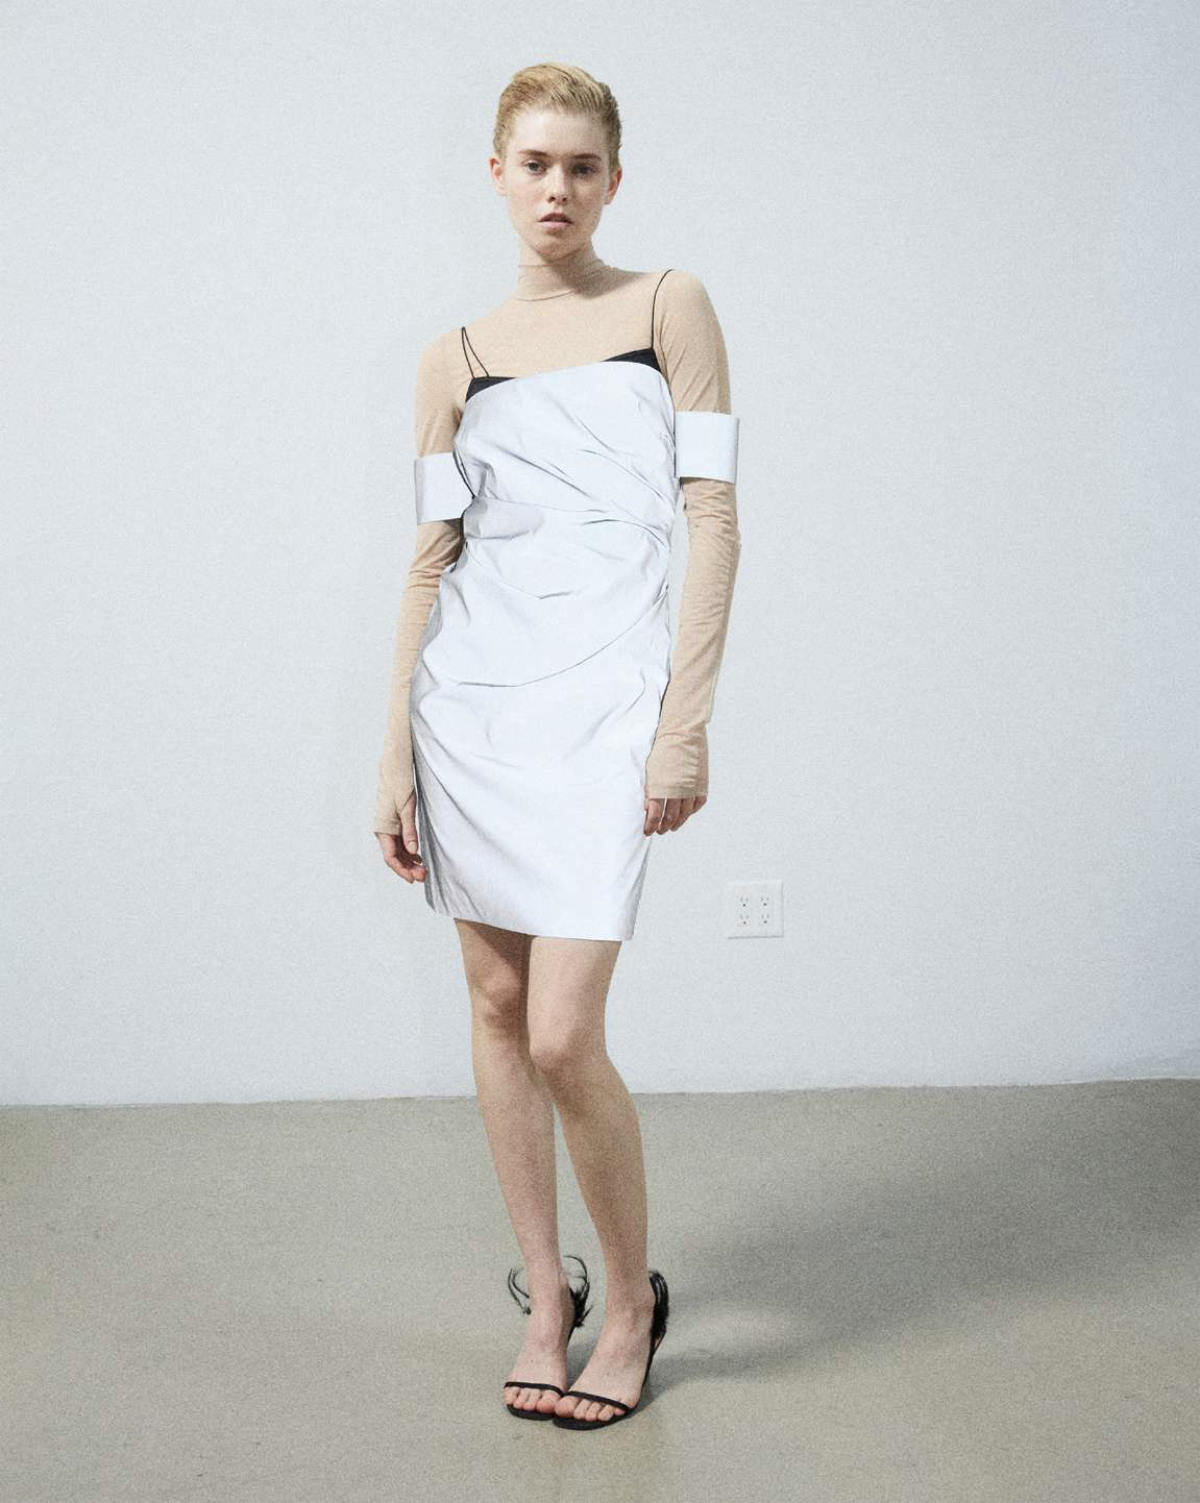 Helmut Lang Presents Its New Pre-Fall 2022 Womenswear Collection